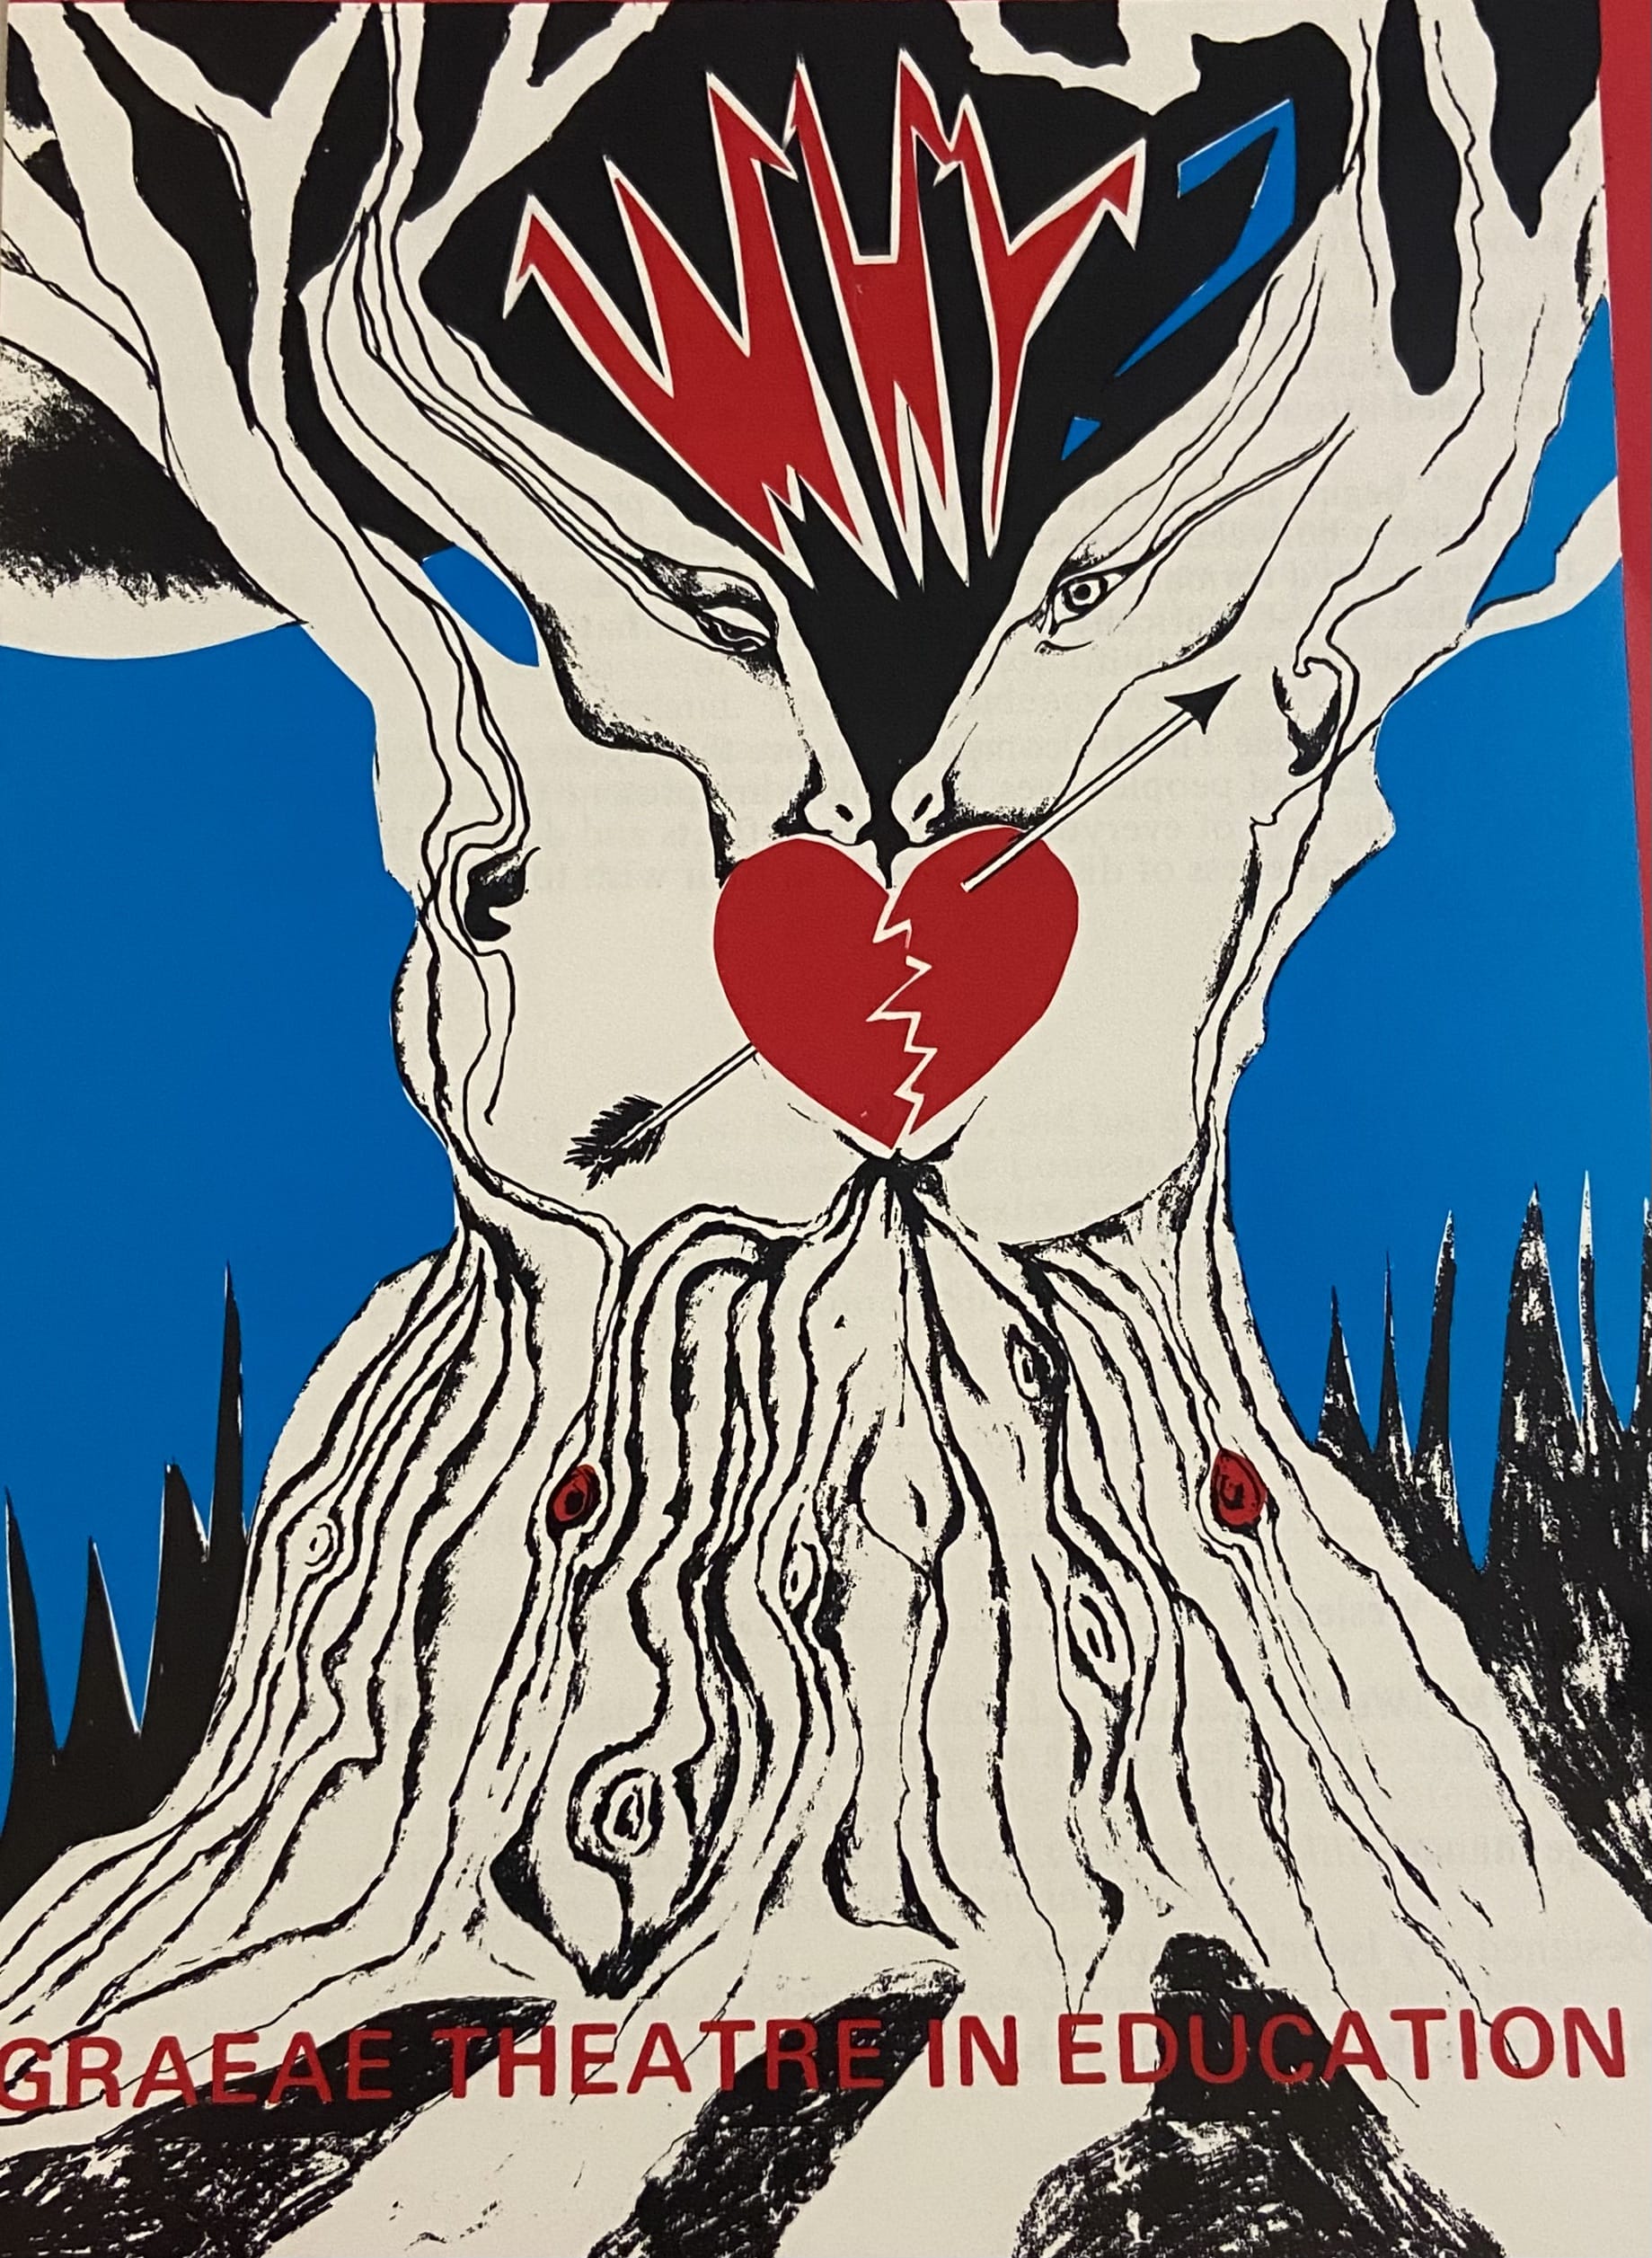 A poster promoting Graeae's production of 'Why'. The poster has a blue background and a black and white drawing of a tree. The patterns in the bark of the tree form a distorted face. In the foreground there is a red broken heart with an arrow through it. There is bold red text at the top that reads 